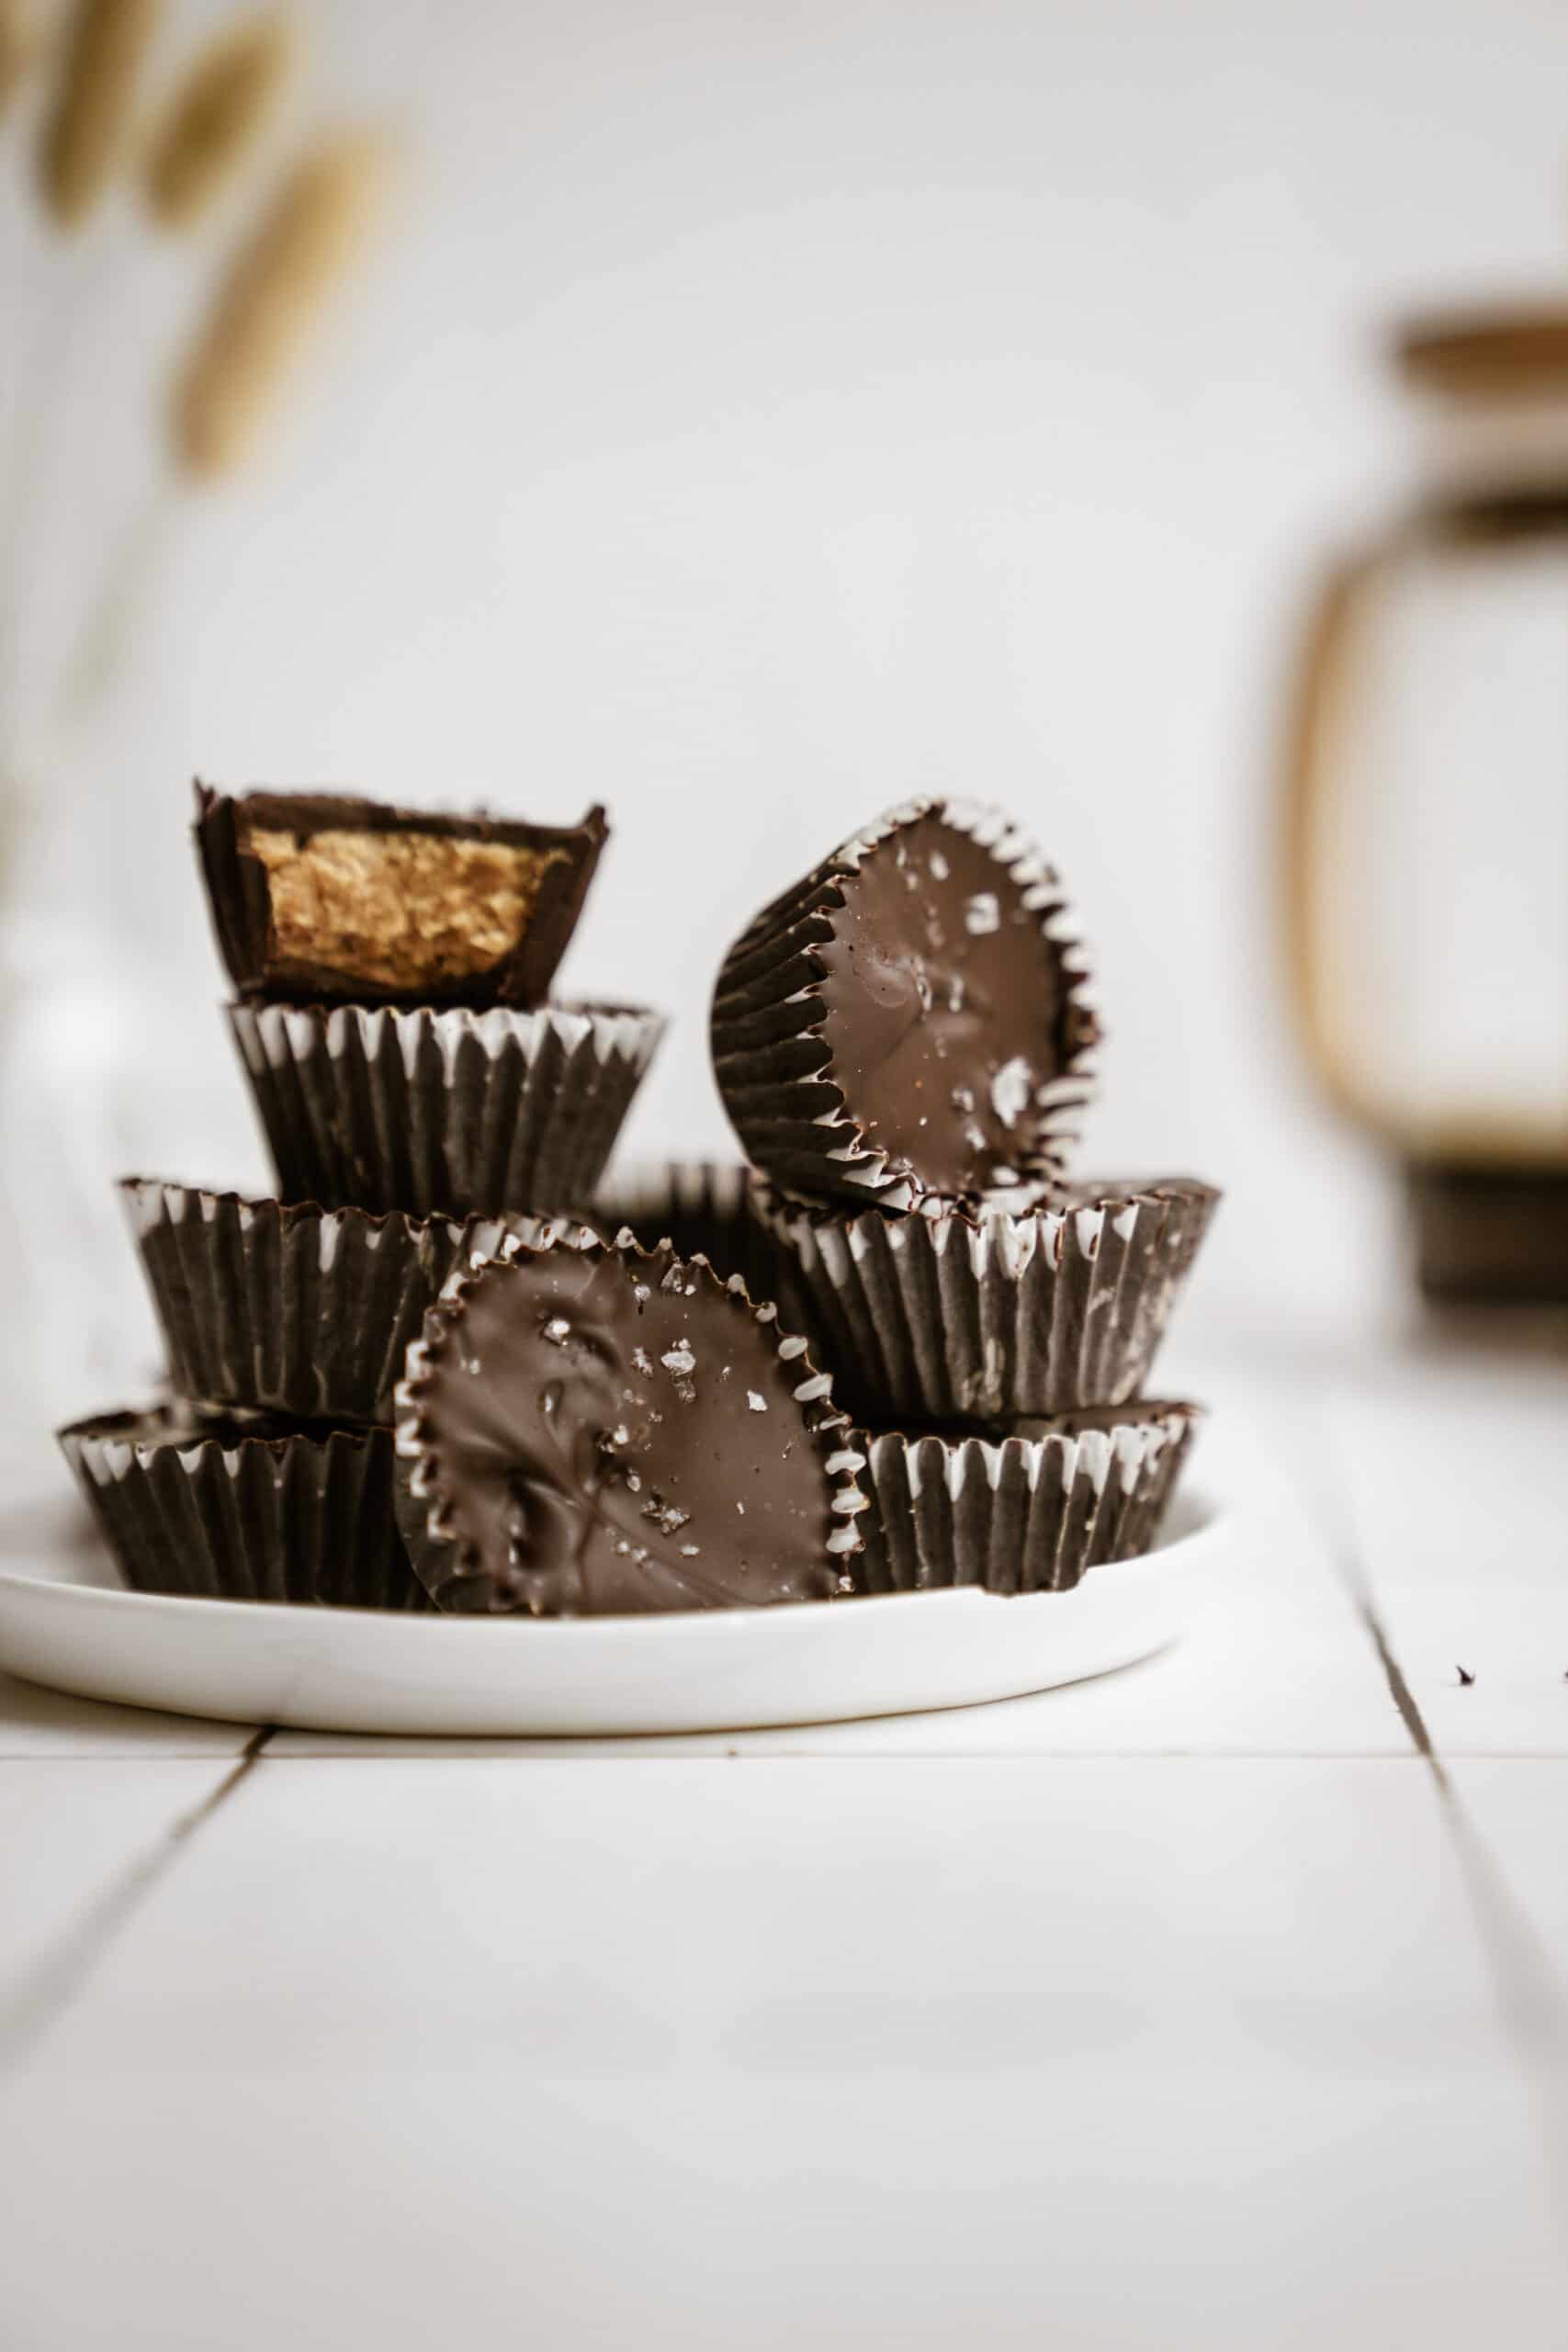 Homemade Peanut Butter Cups stacked on a plate